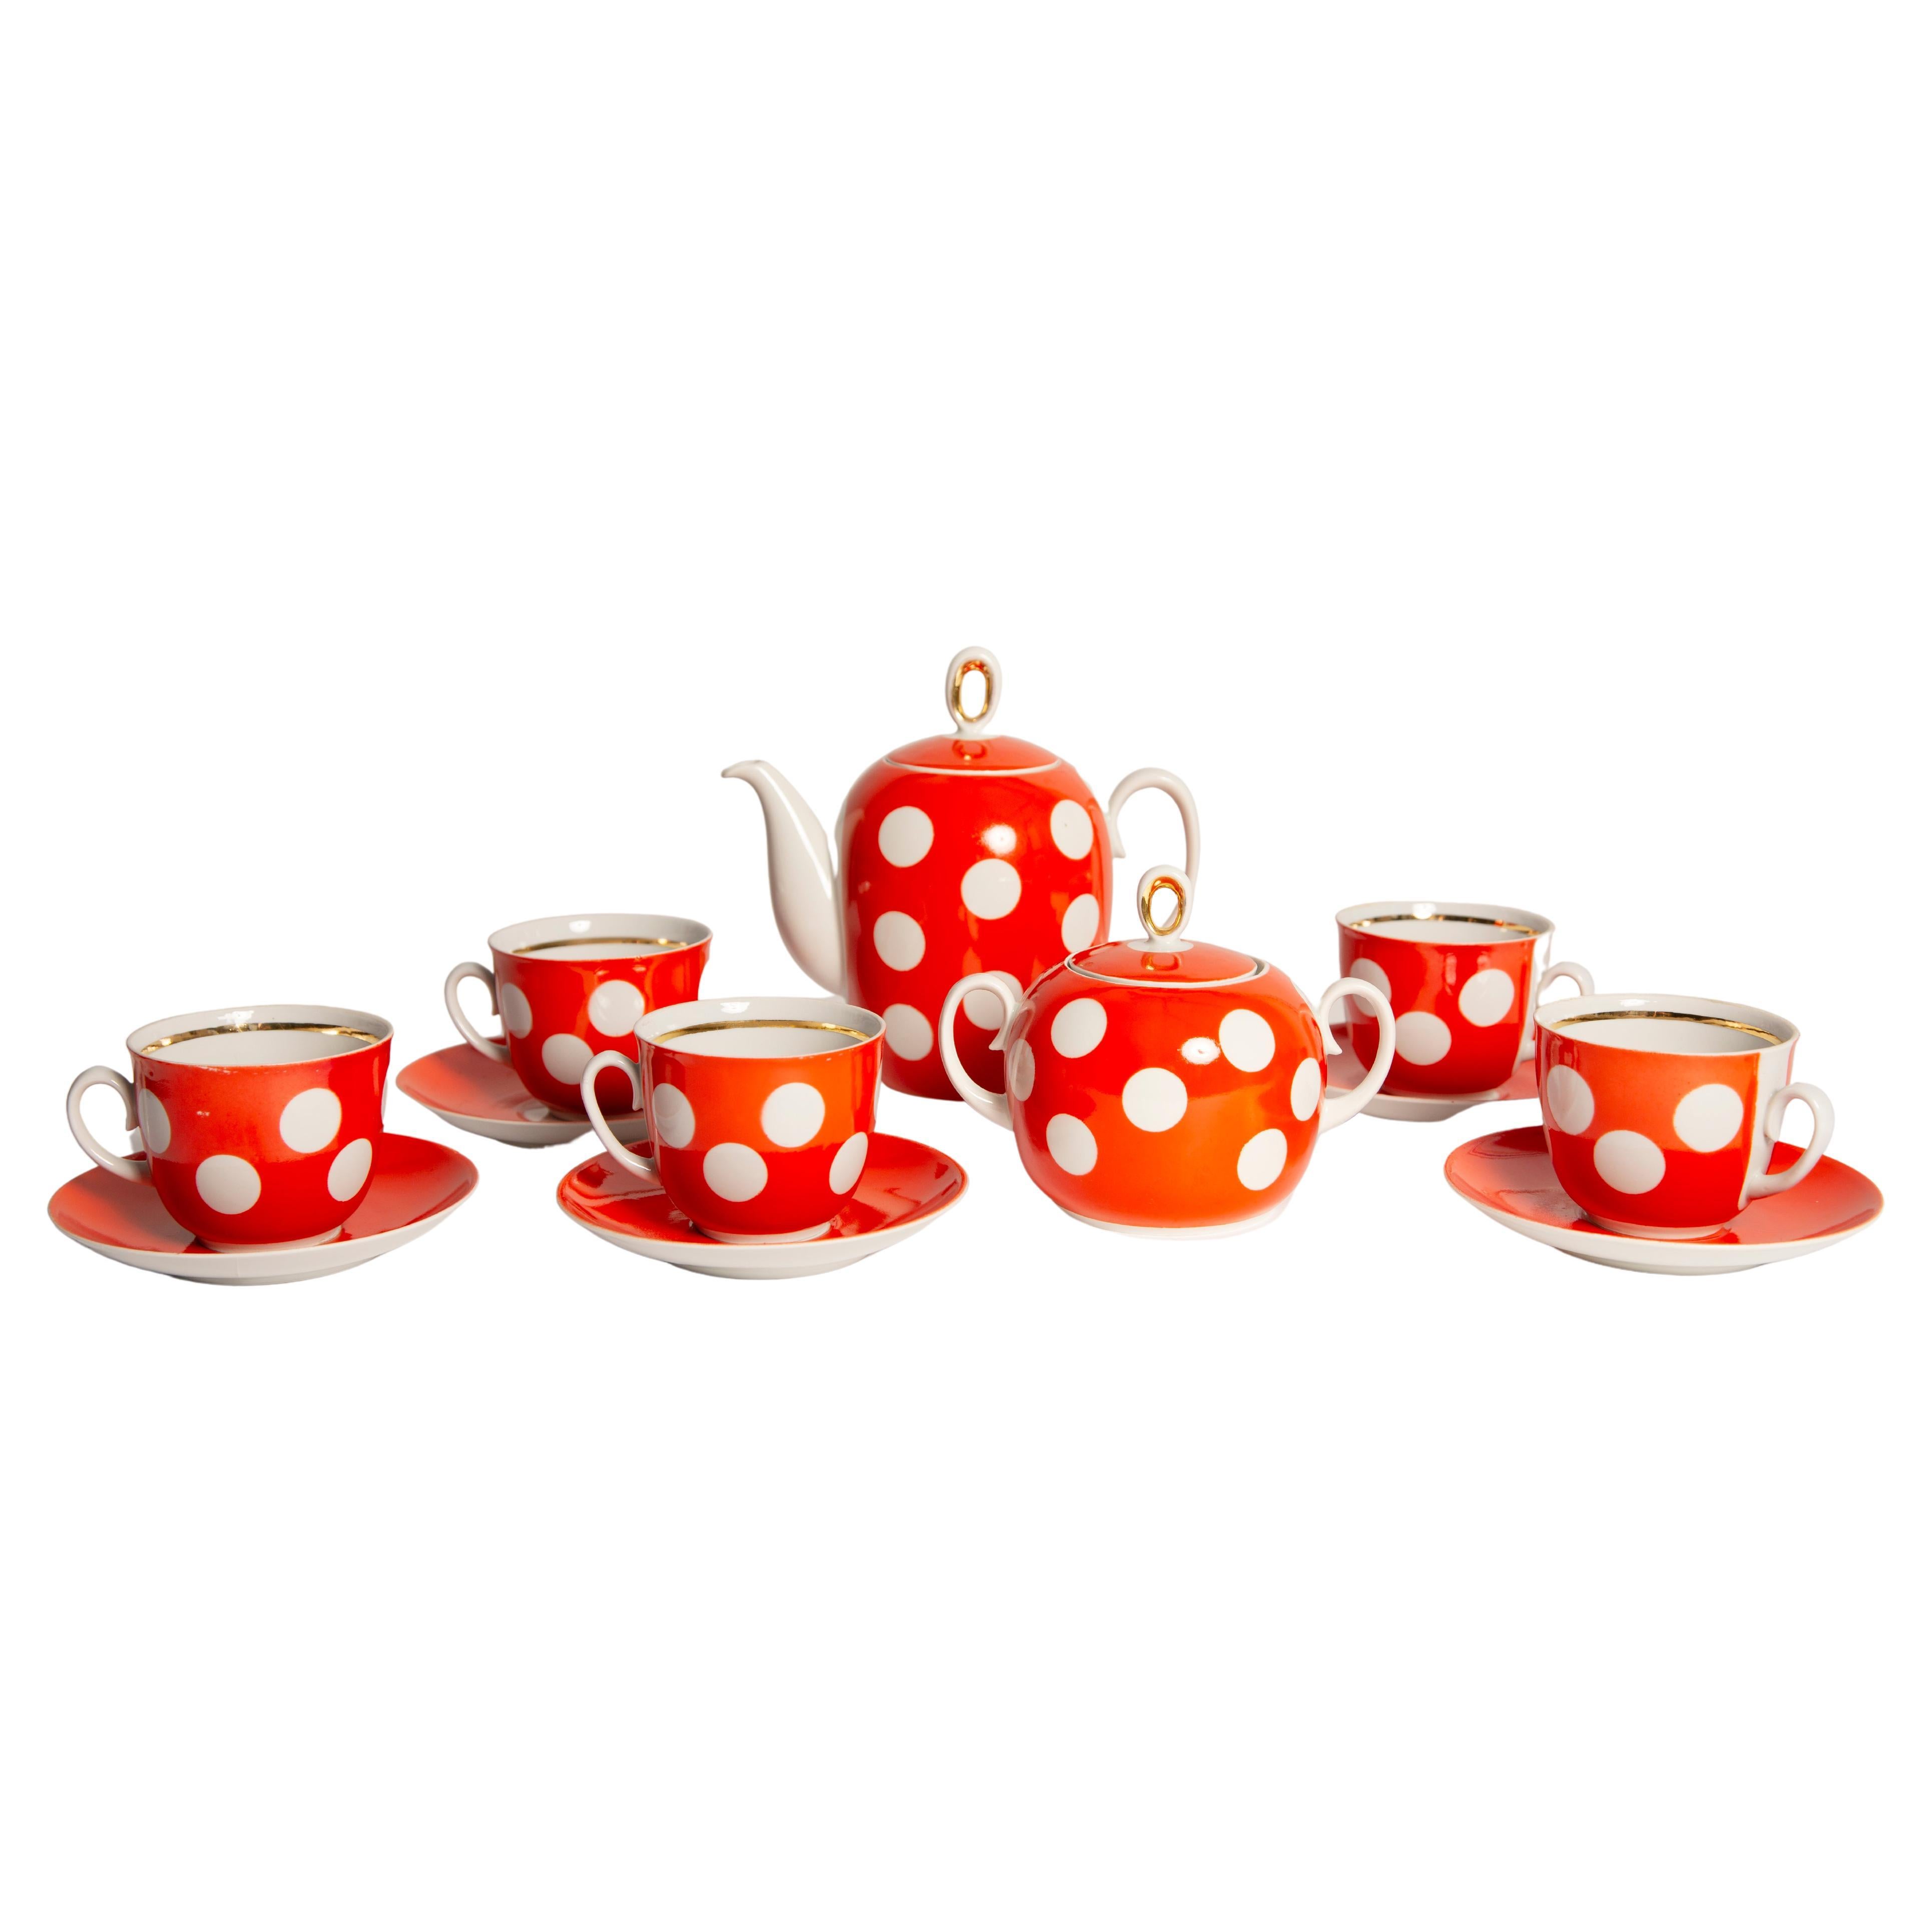 Midcentury Porcelain Red Dots Tea Coffee Service Jug and Cups, Poland, 1960